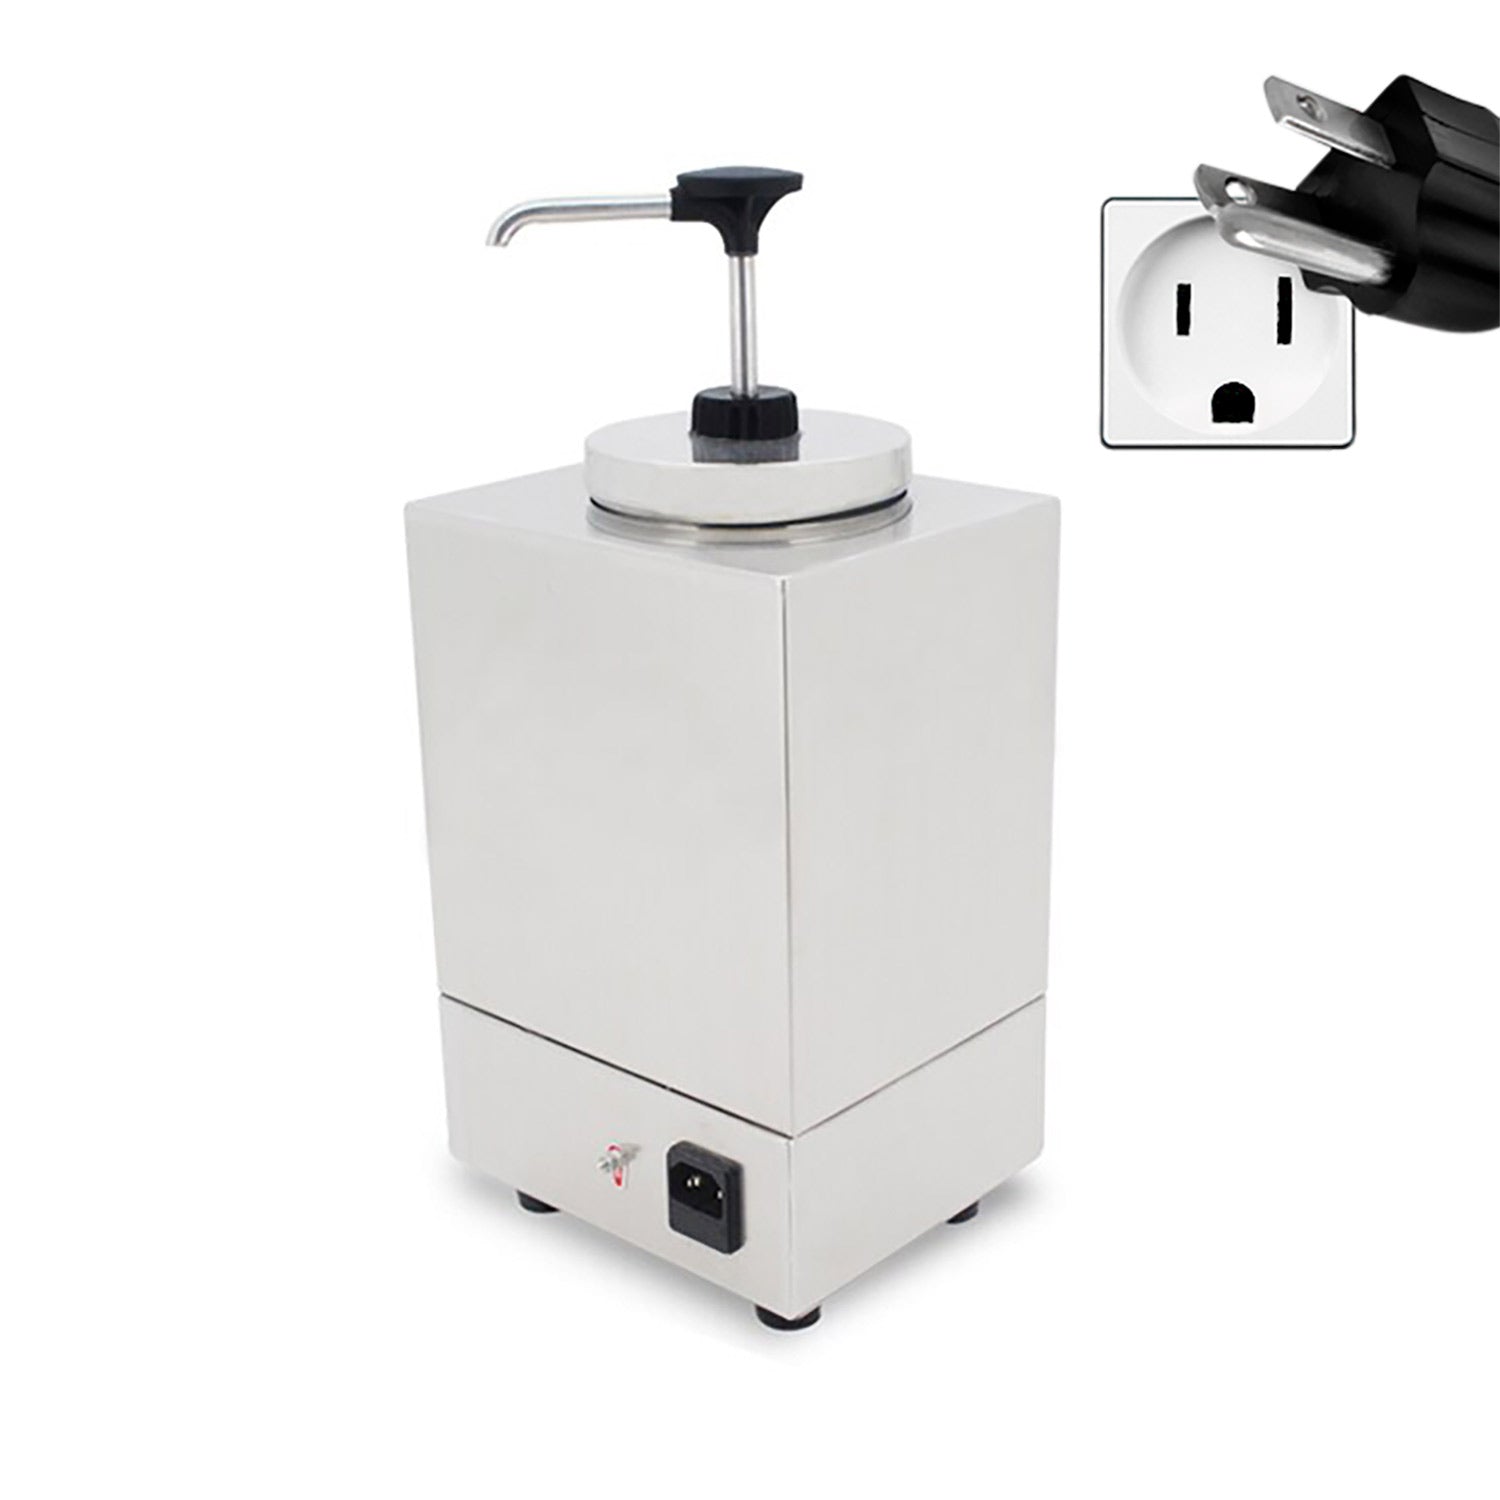 AP-313S Electric Sauce Dispenser | Topping Warmer with Pump | Sauce Dispenser | Commercial and Home Use